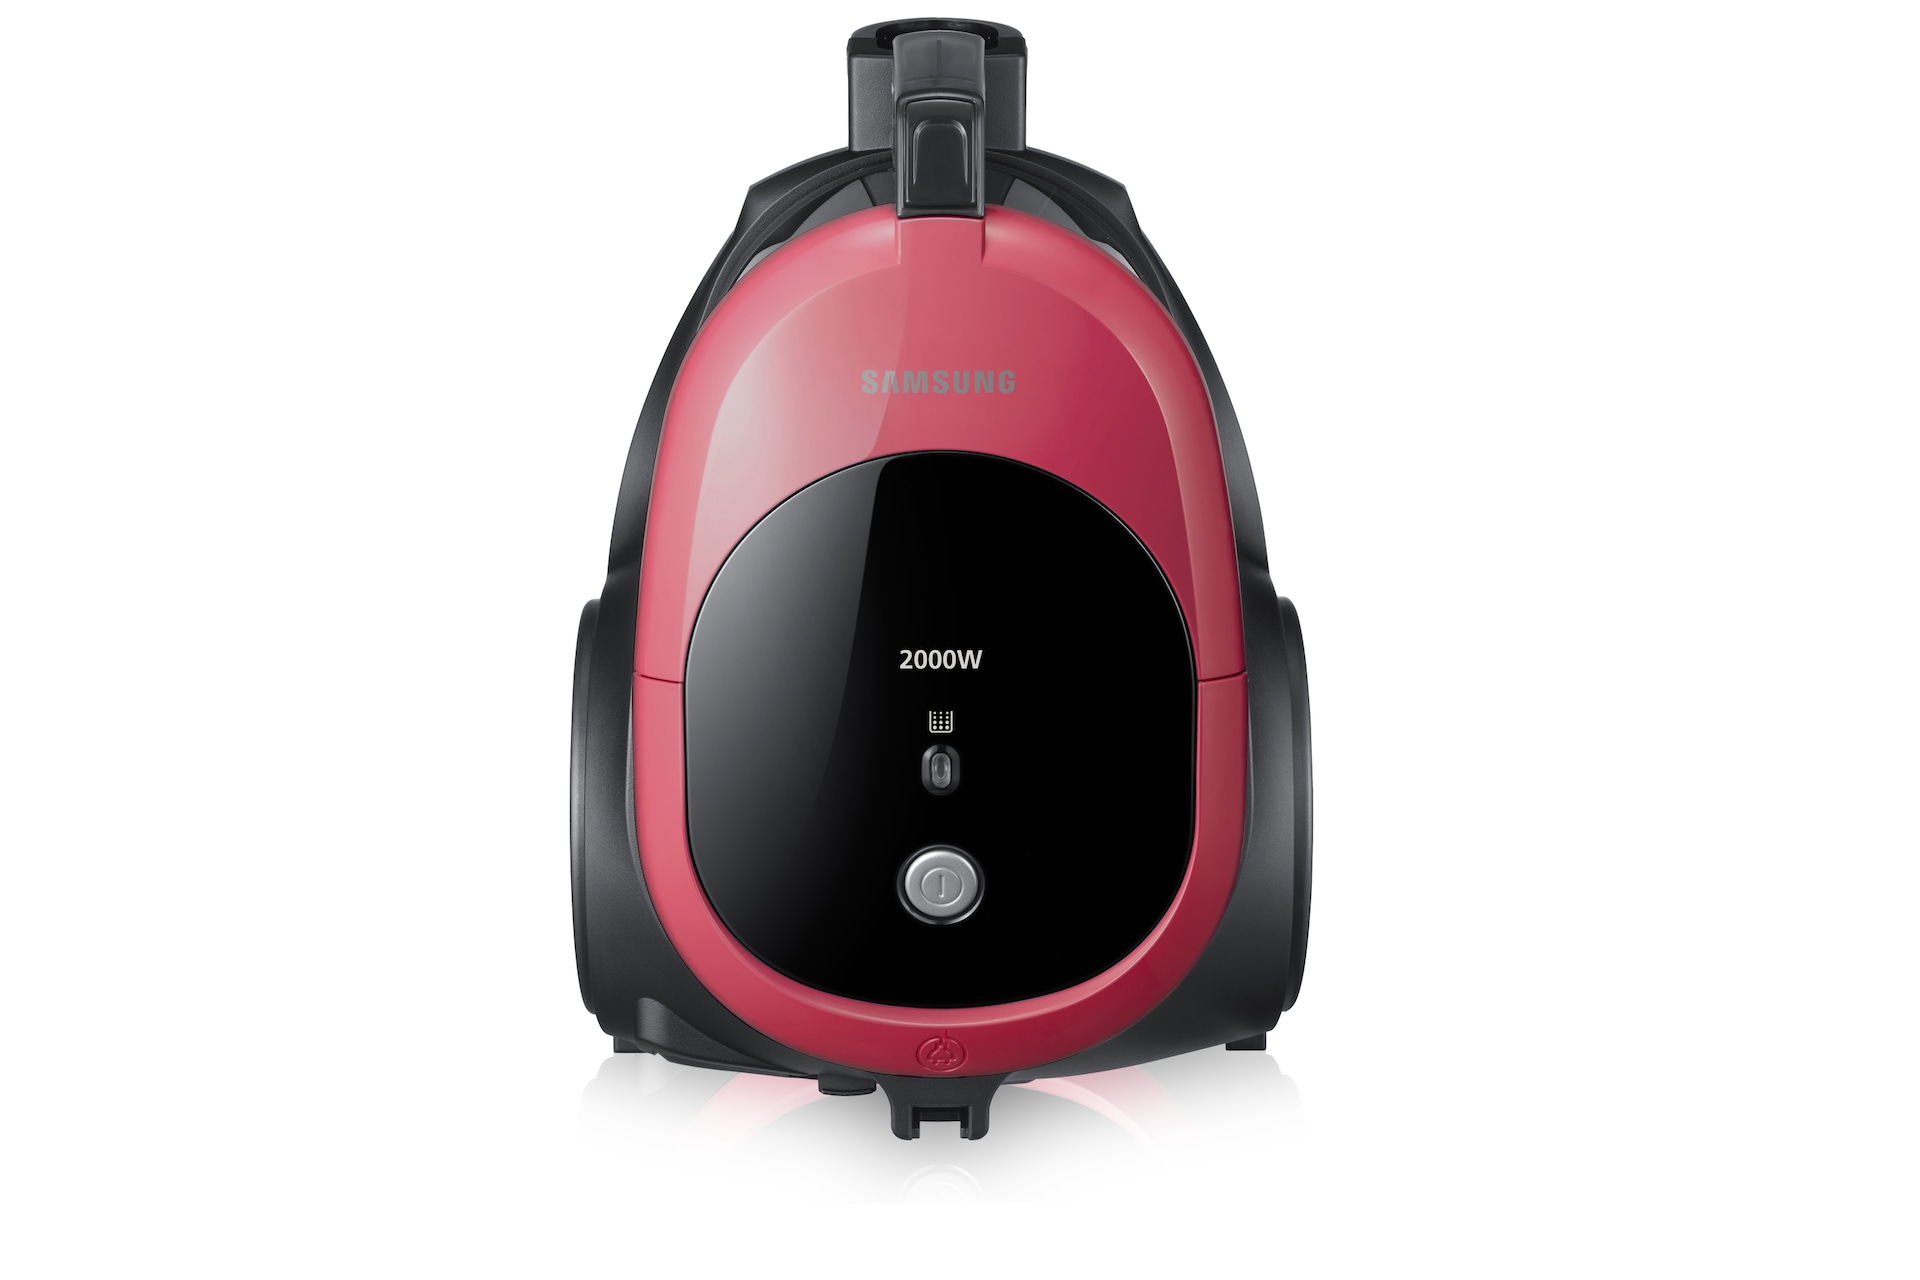 Samsung Vacuum Cleaner: What are the common problems?